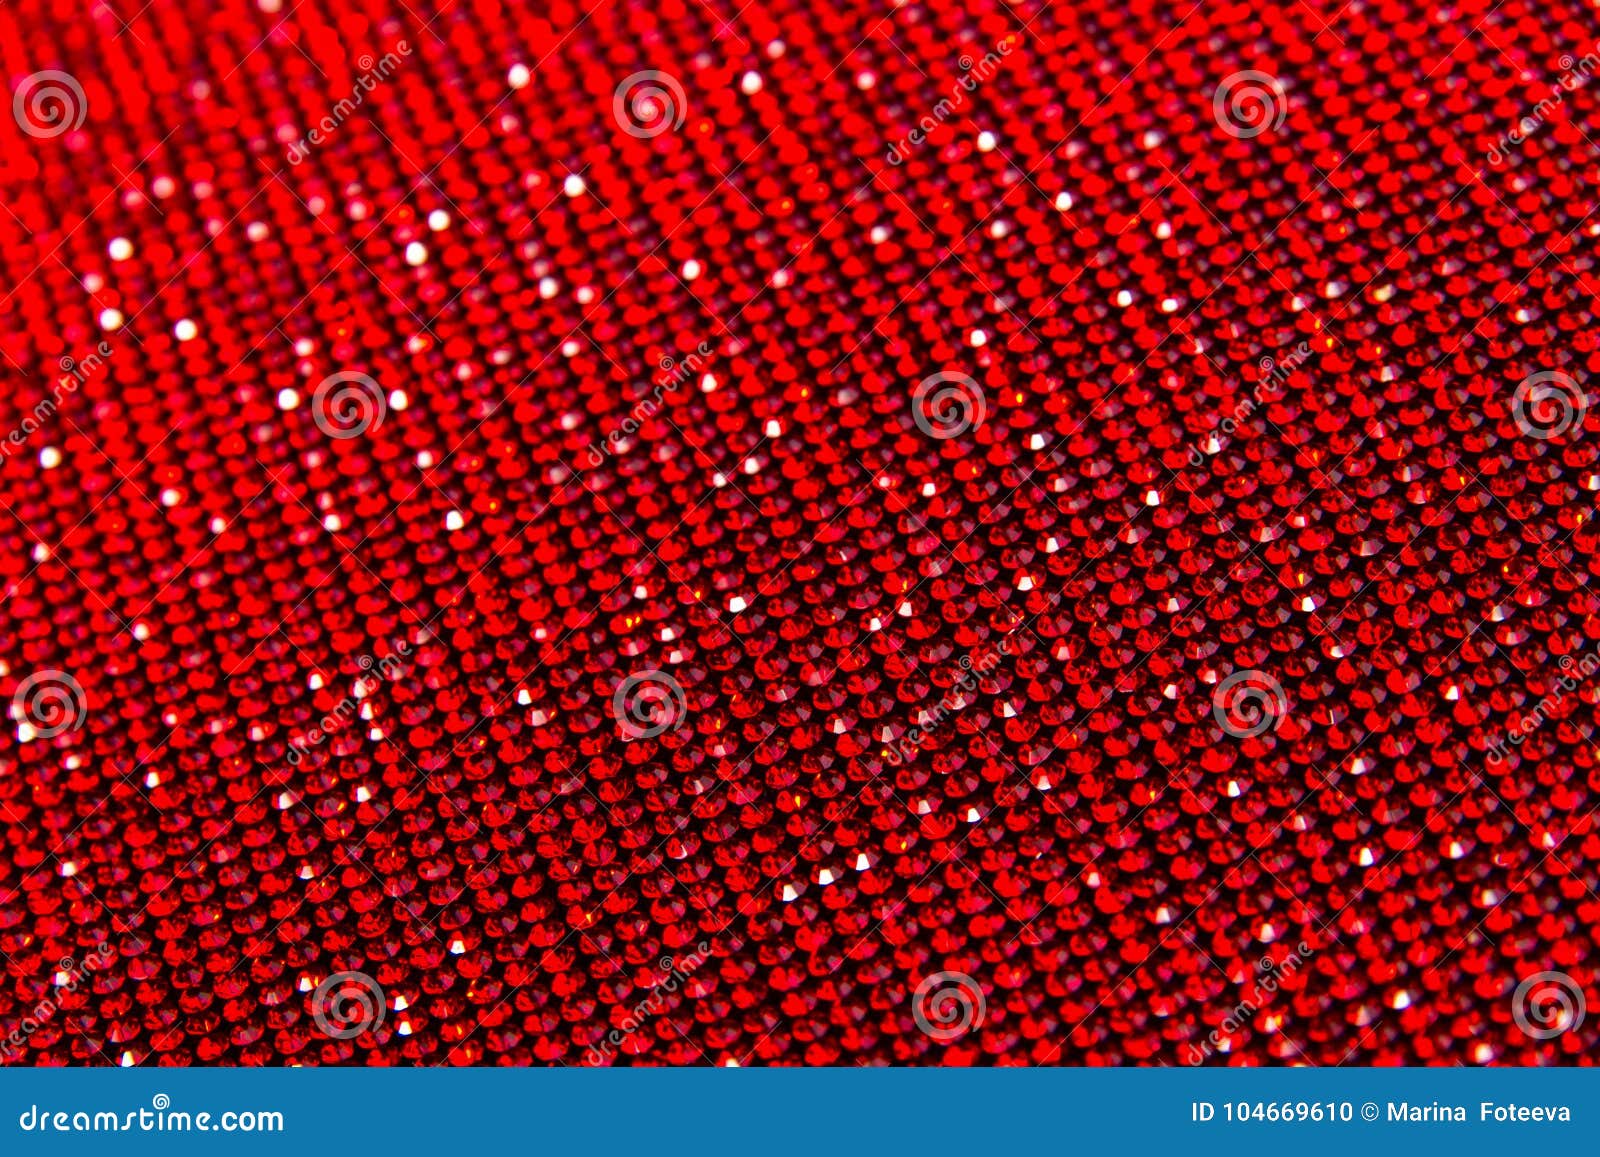 Canvas Of Red Rhinestones. Background Stock Photo, Picture and Royalty Free  Image. Image 77494520.